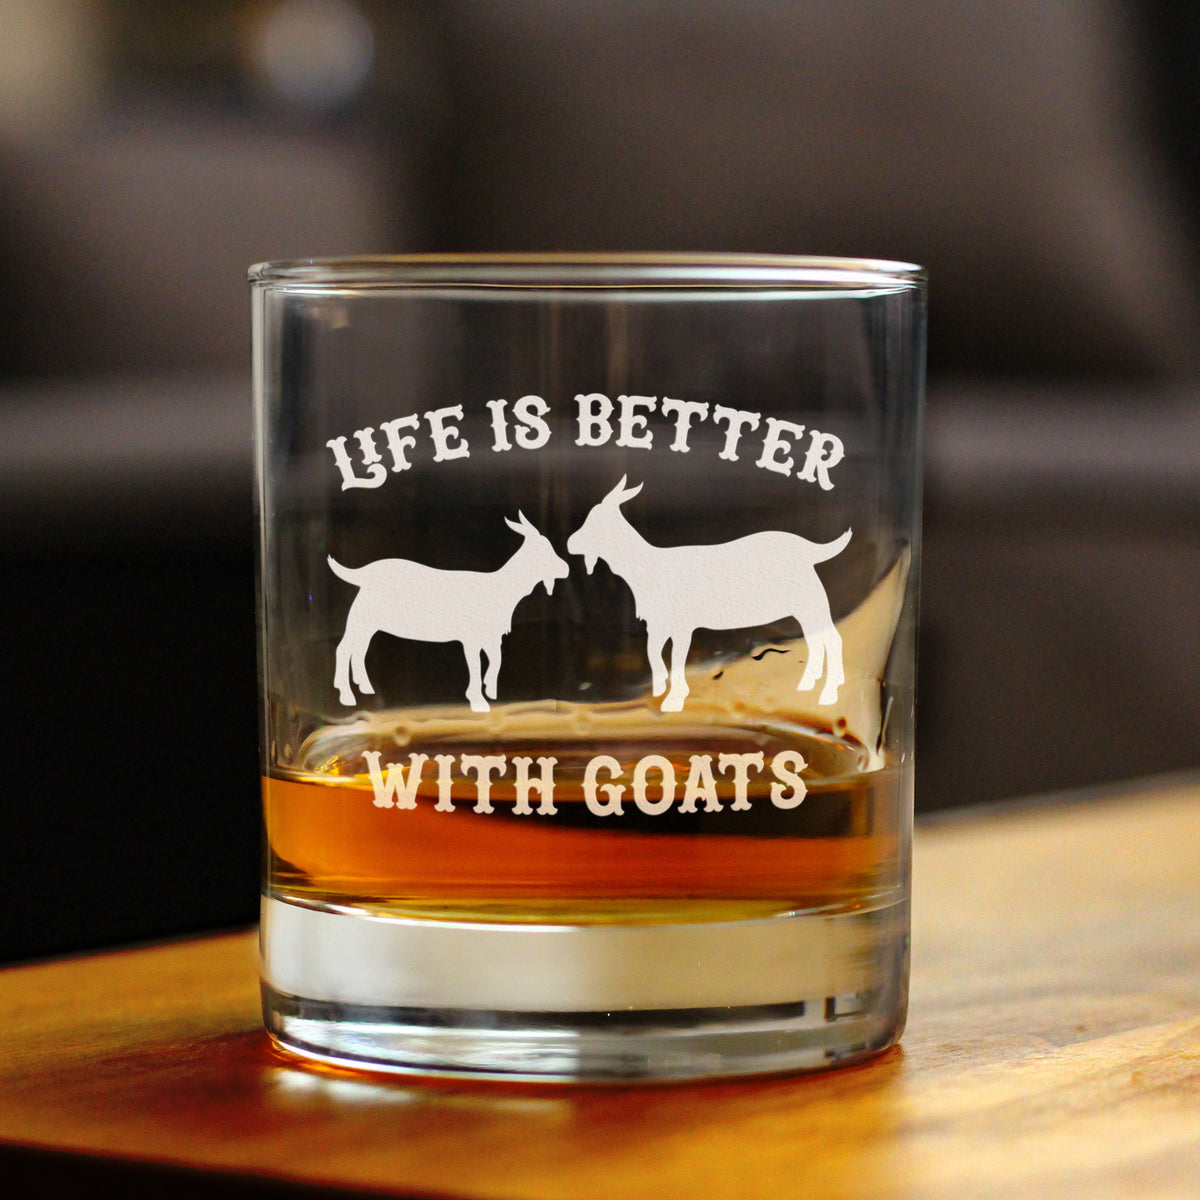 Life is Better With Goats - Goat Whiskey Rocks Glass - Unique Funny Farm Animal Themed Decor and Gifts - 10.25 Oz